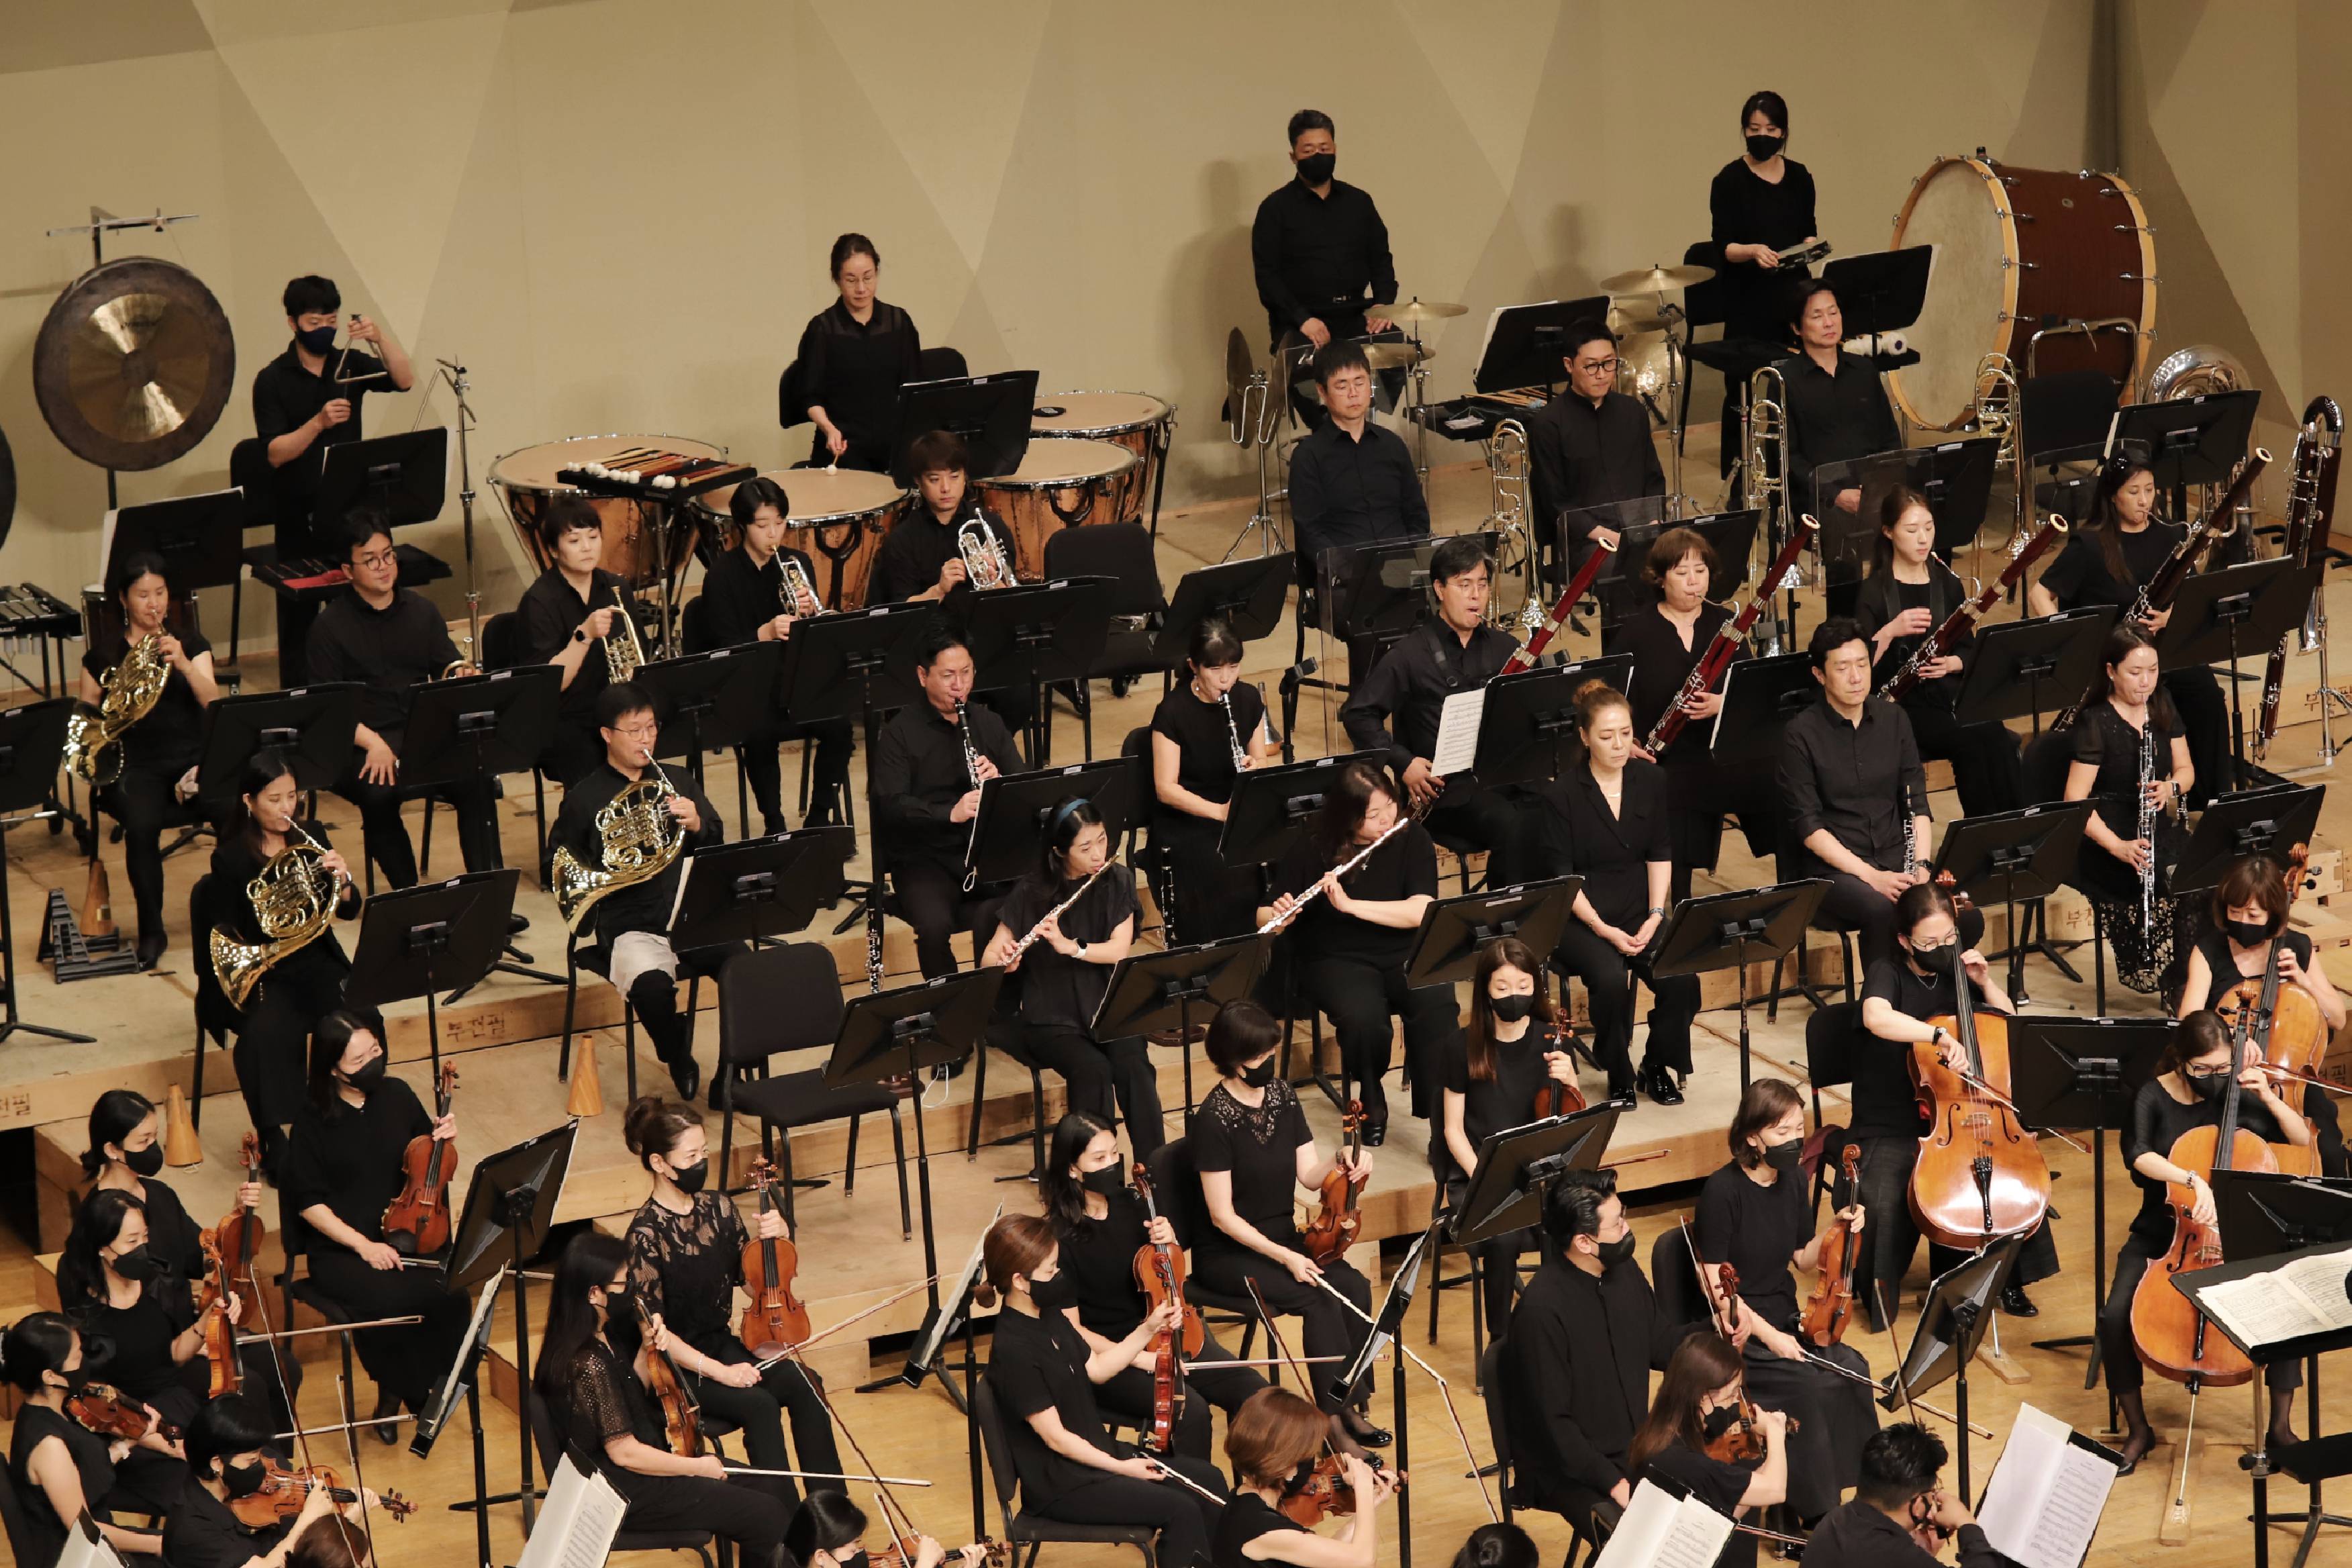 [7.22]Bucheon Philharmonic Orchestra 292nd Subscription Concert - Best Classic Series 'Sea of France'